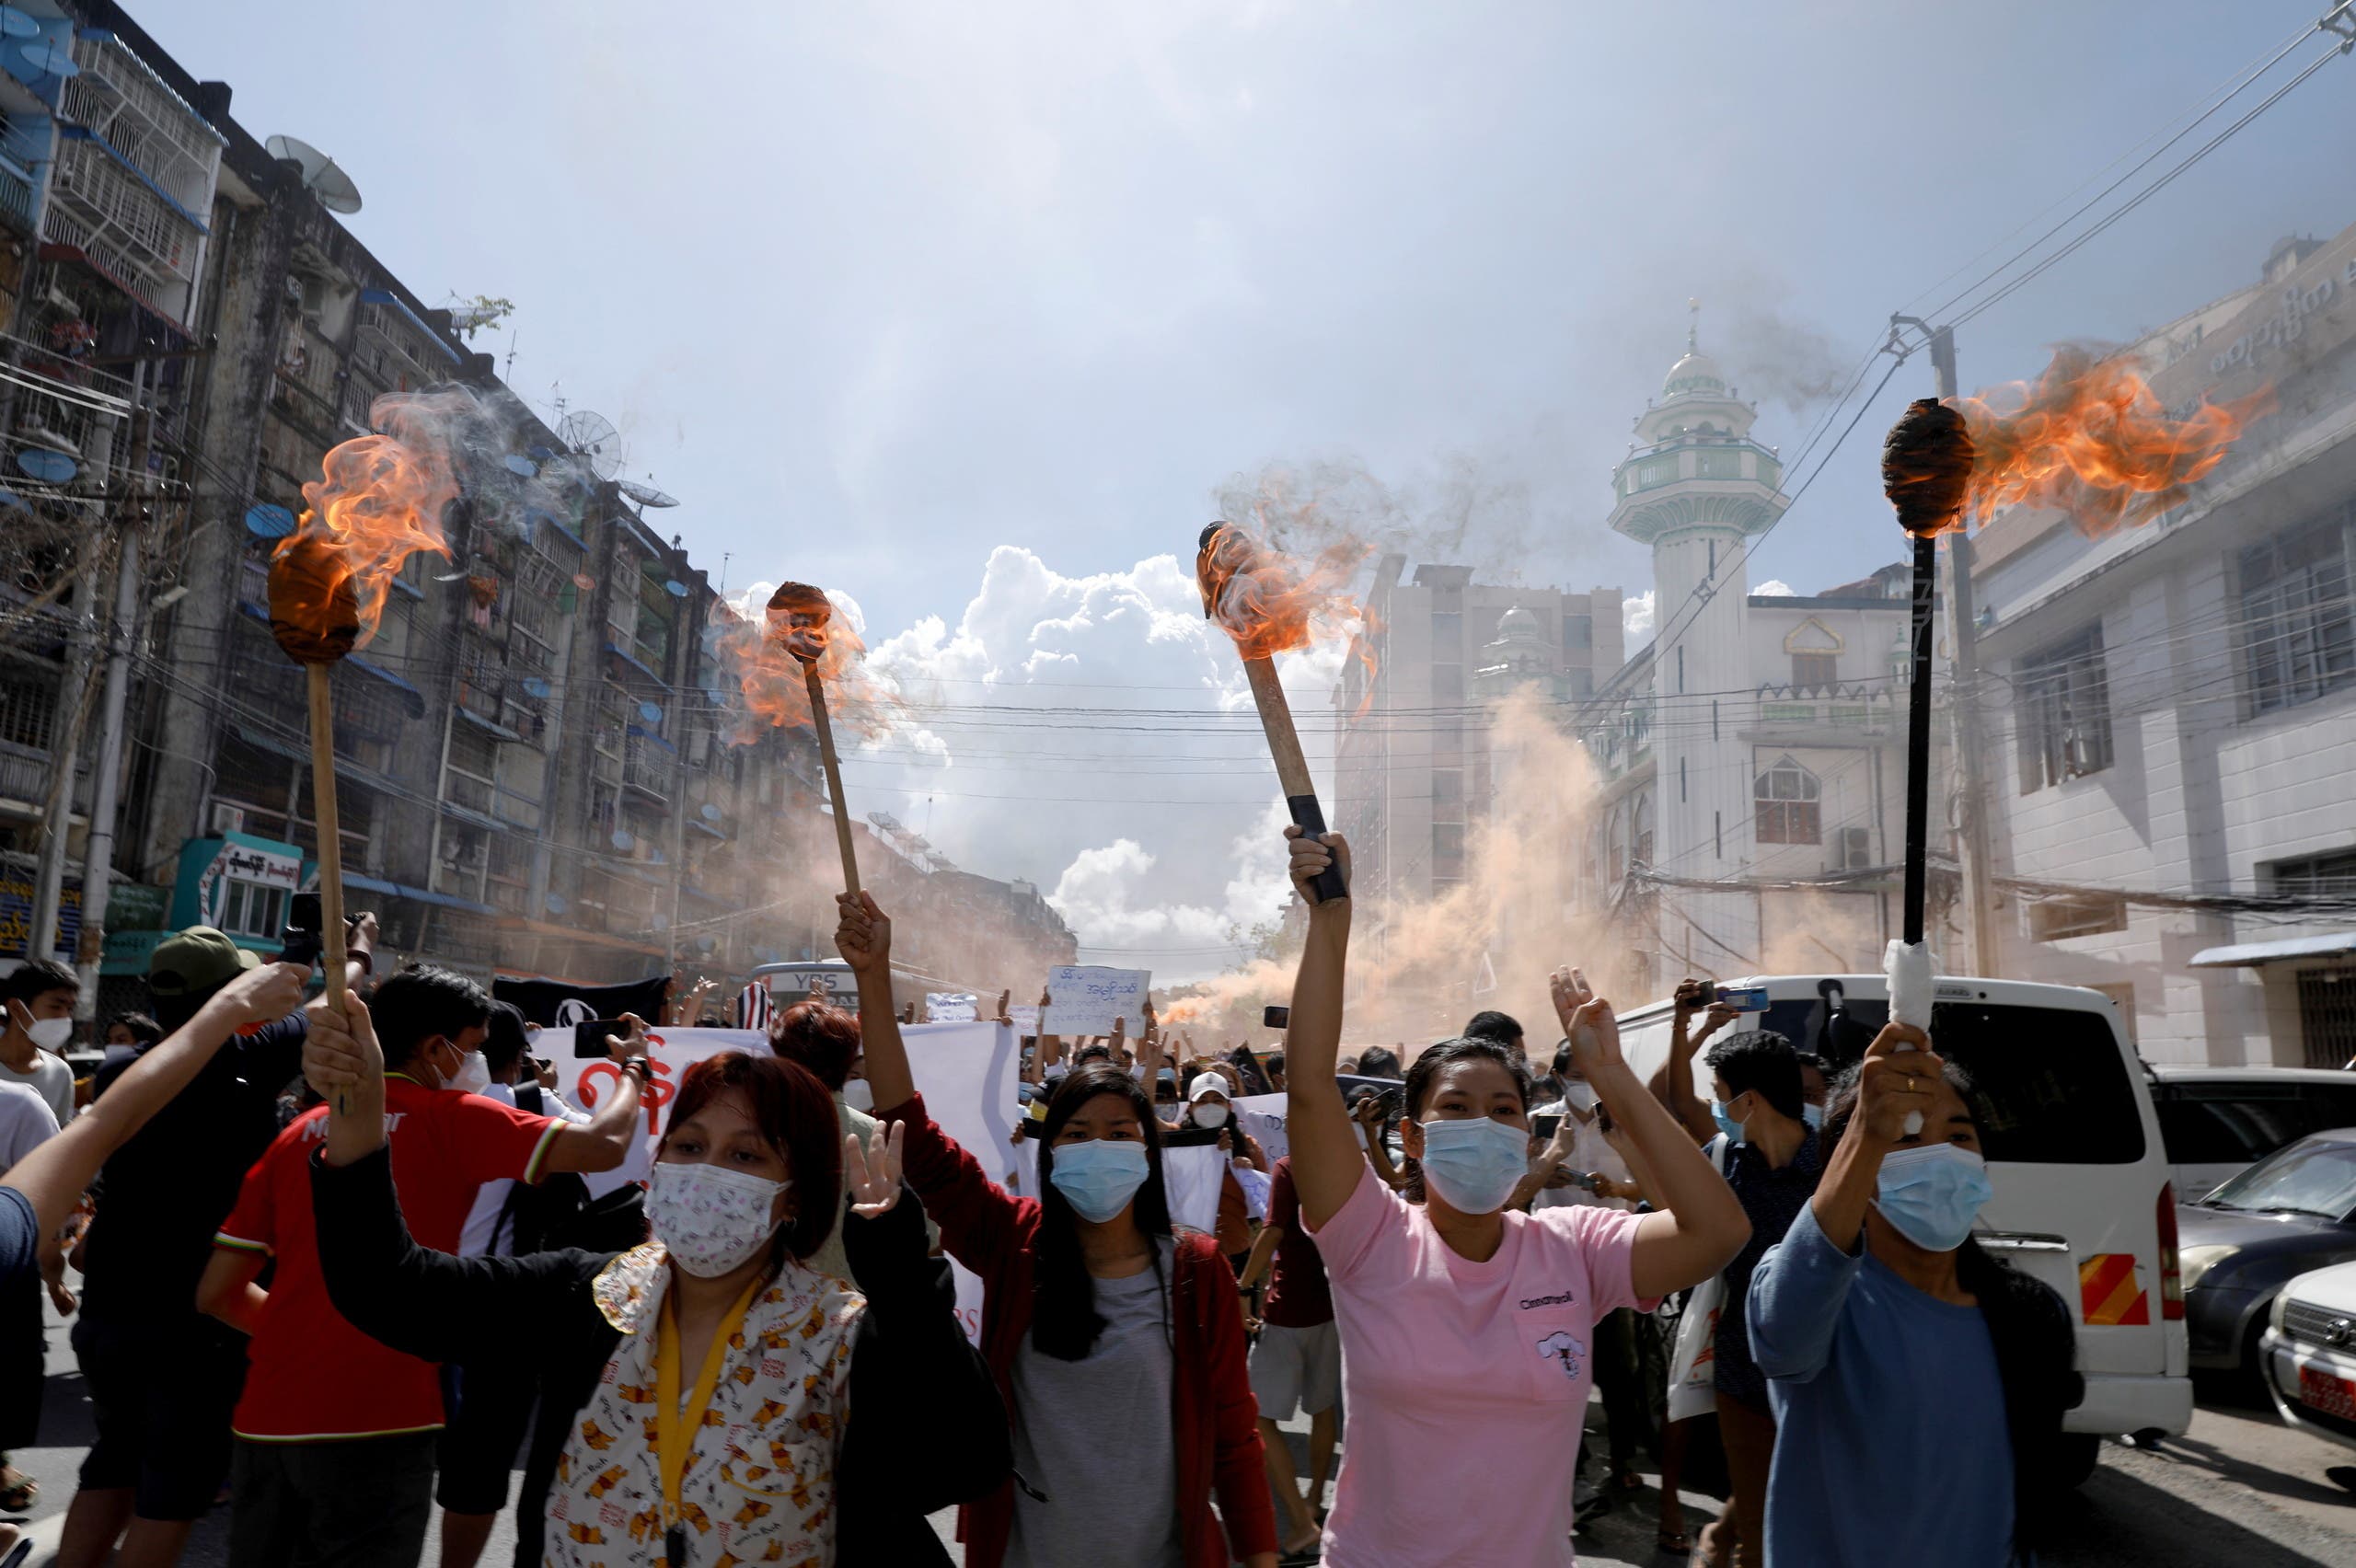 A group of women hold torches as they protest against the military coup in Yangon, Myanmar July 14, 2021. (File photo: Reuters)